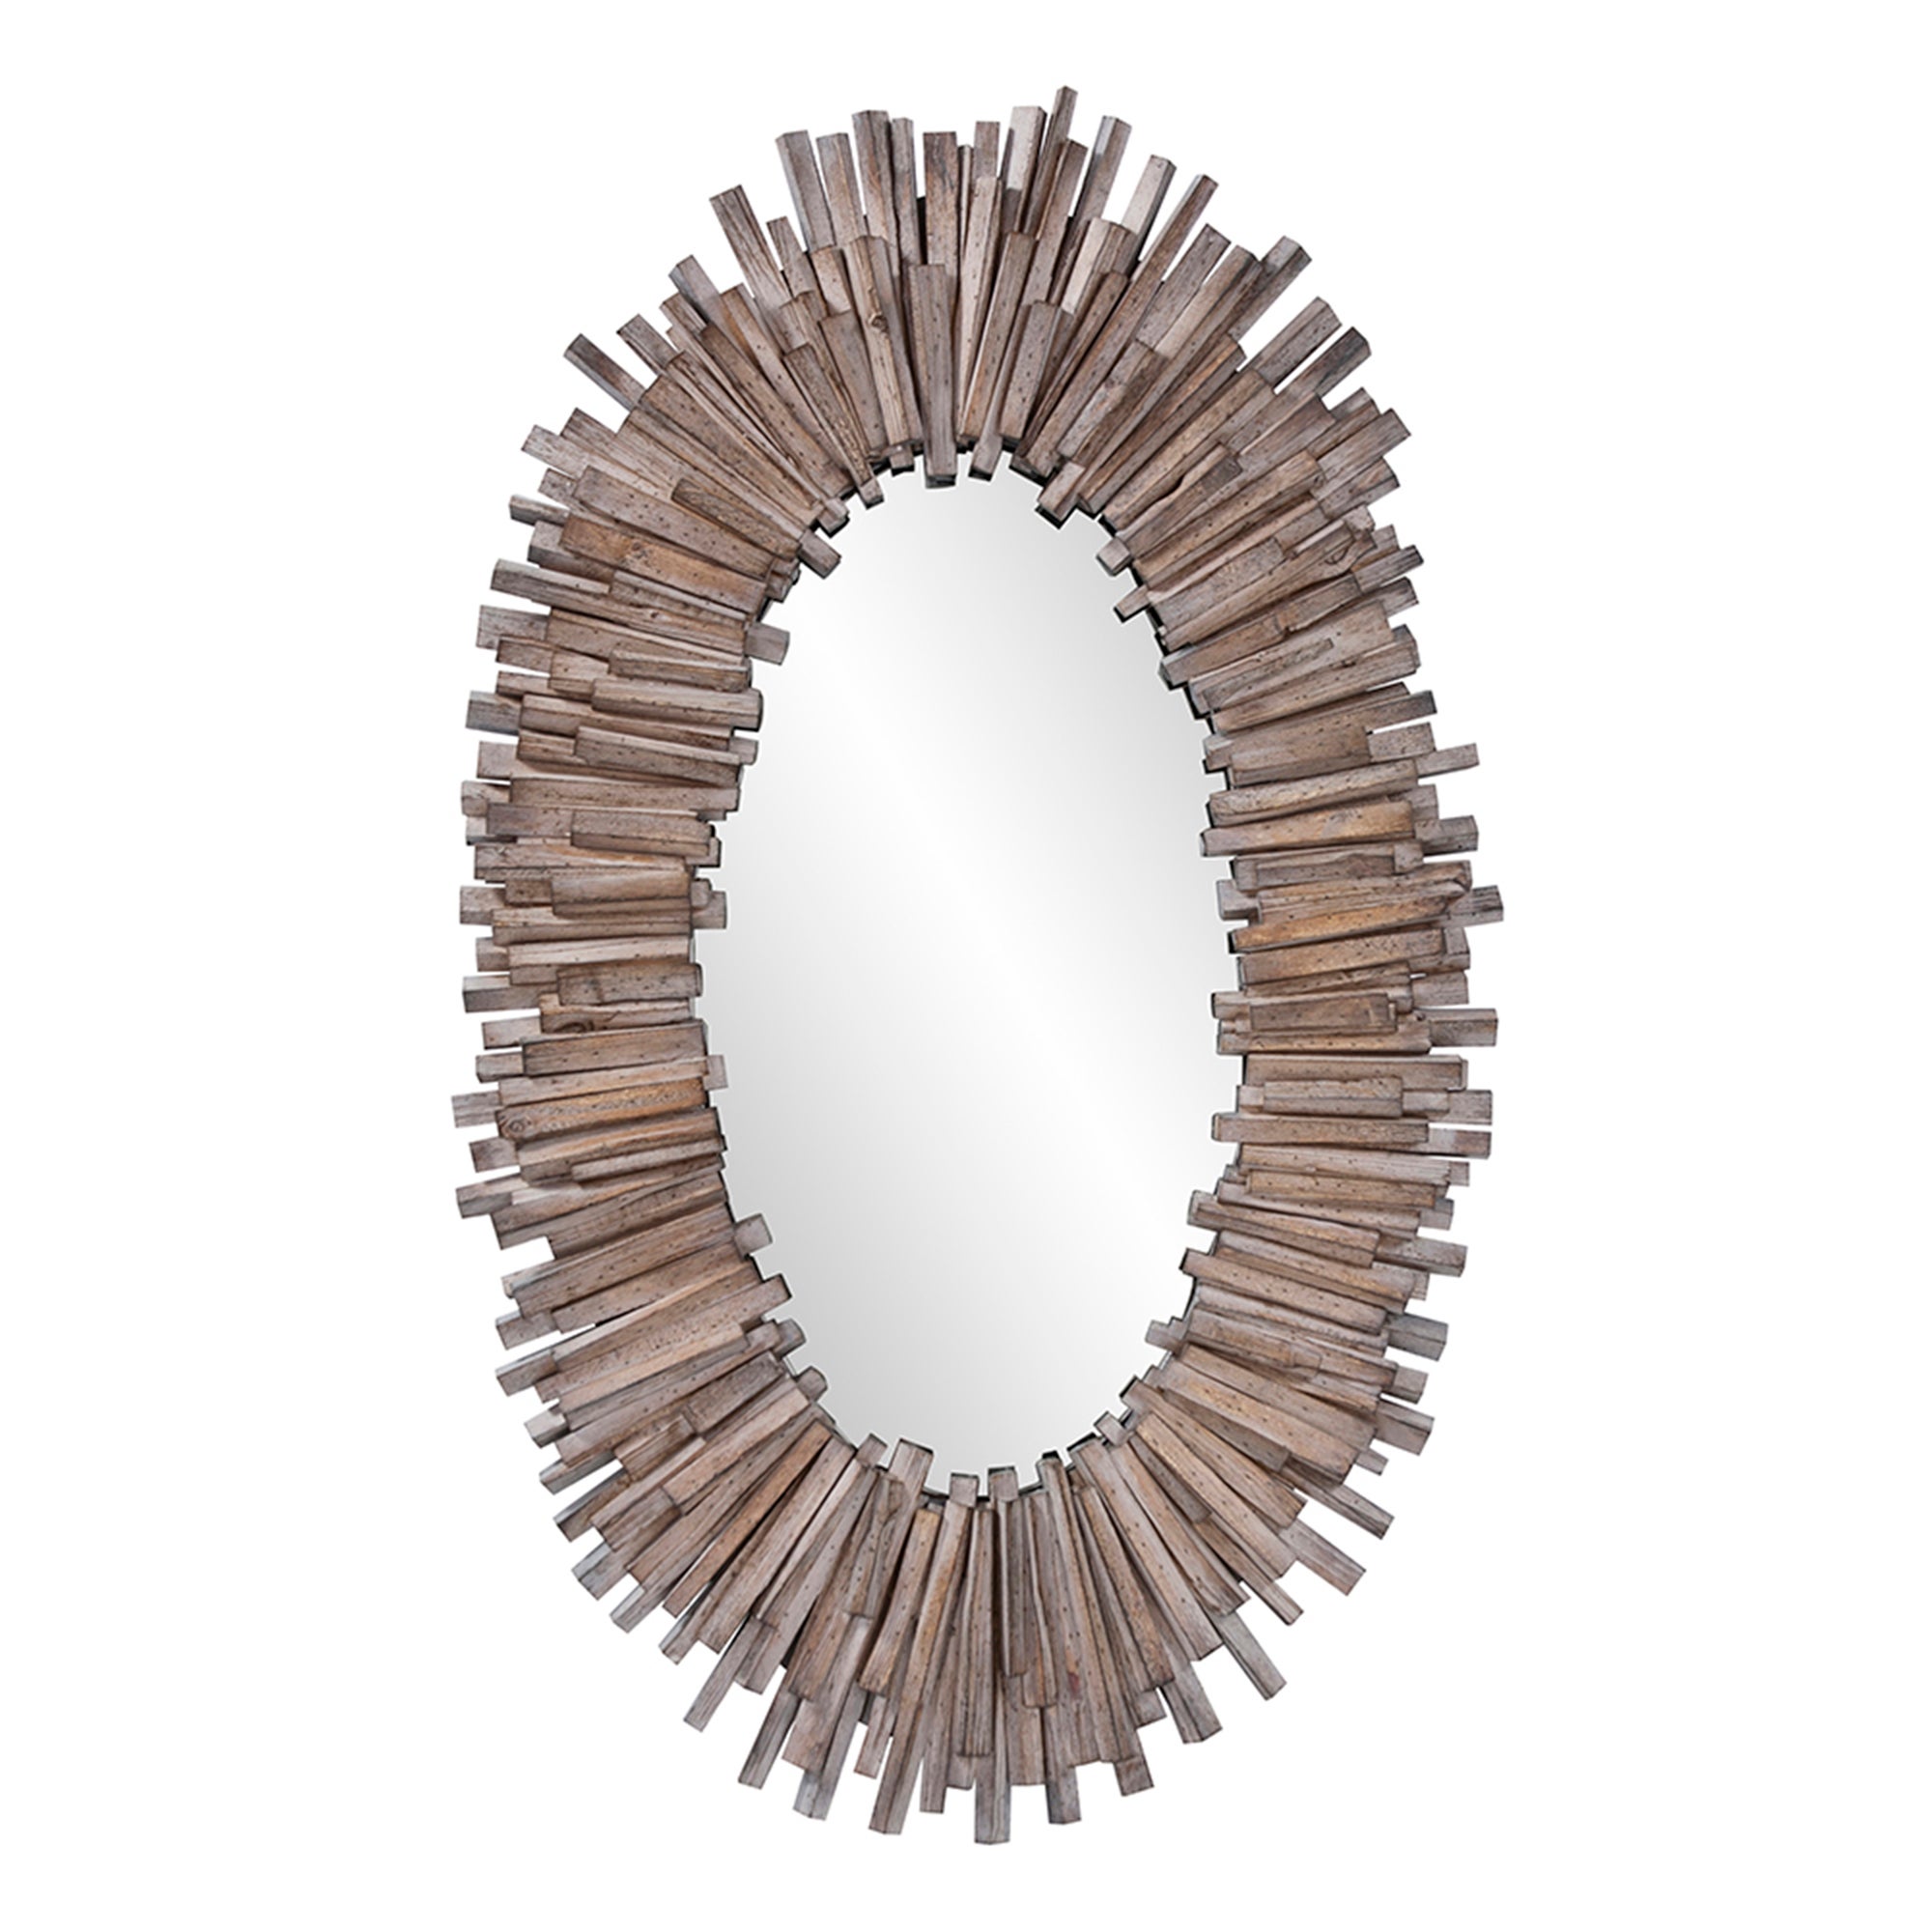 Mirrors - Oval | The Howard Elliott Collection